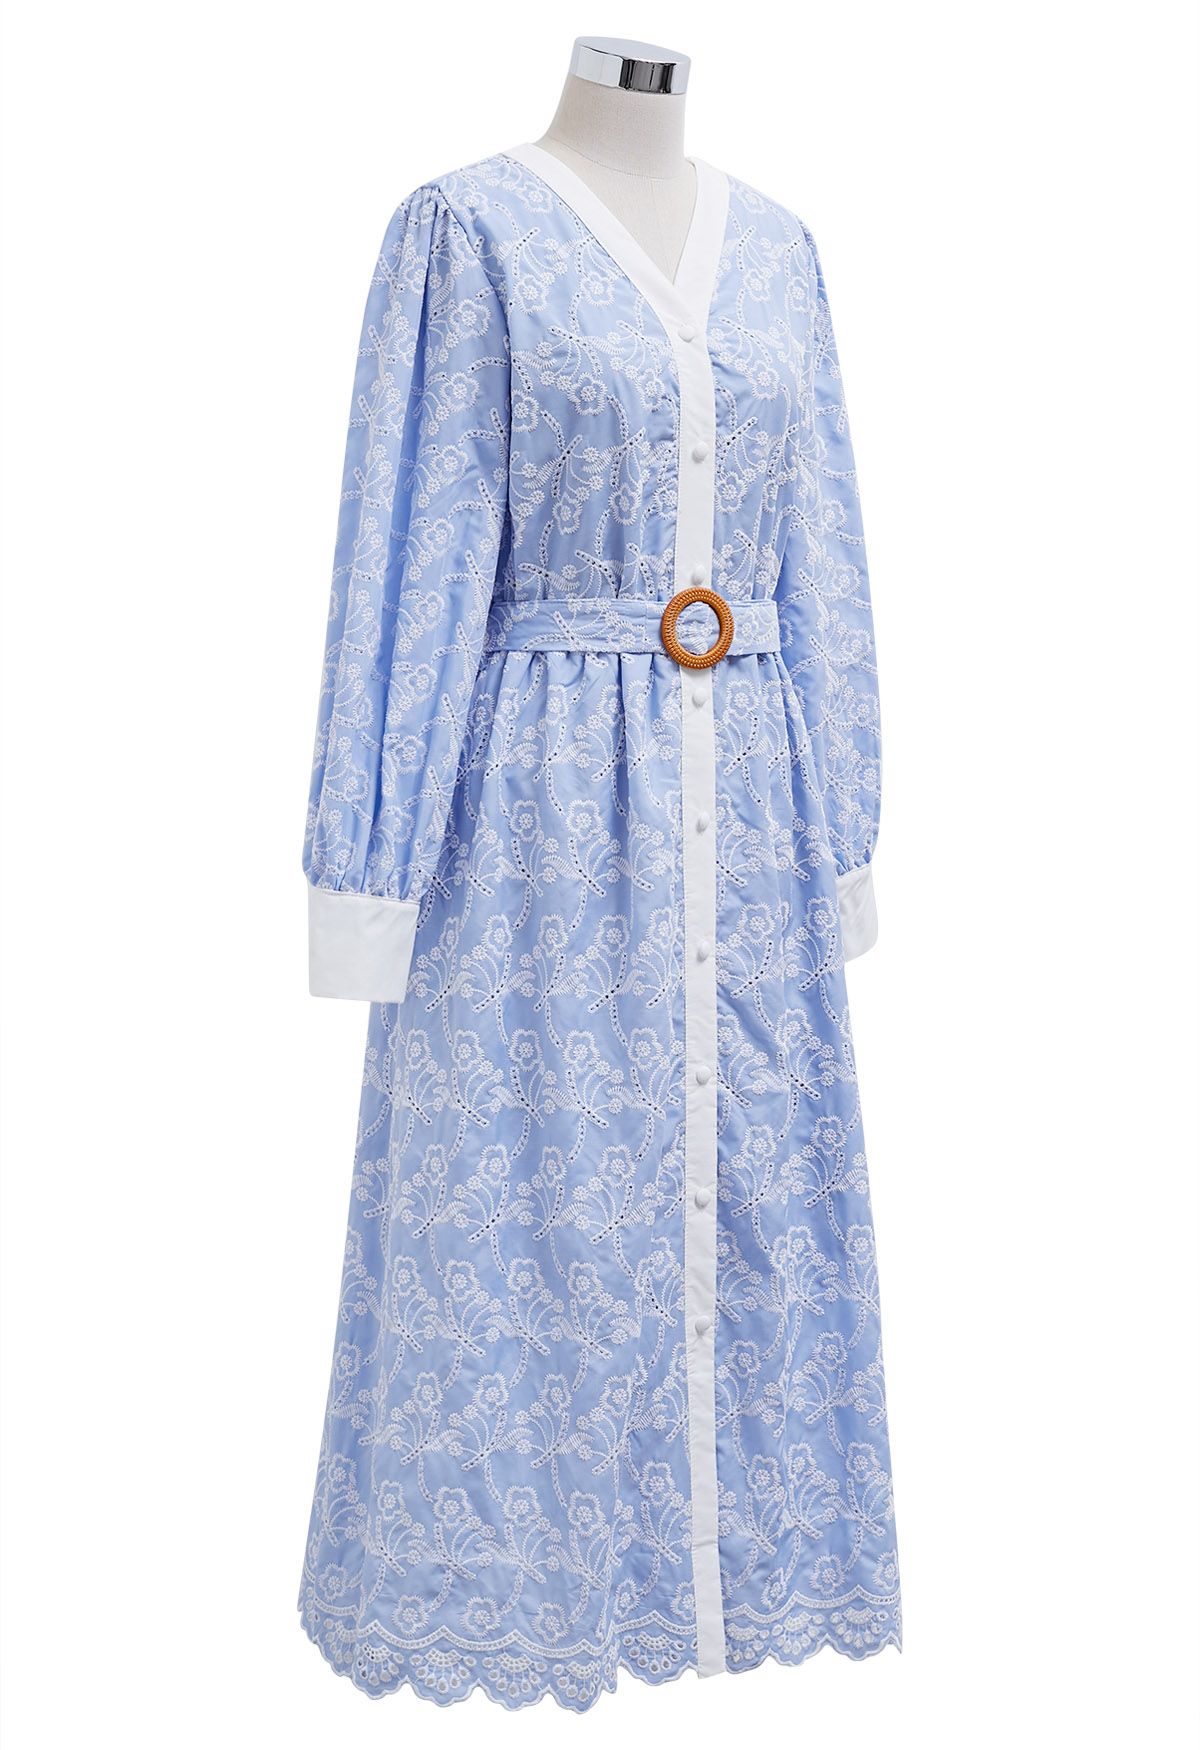 Dancing Floret Embroidered Button Down Dress in Baby Blue